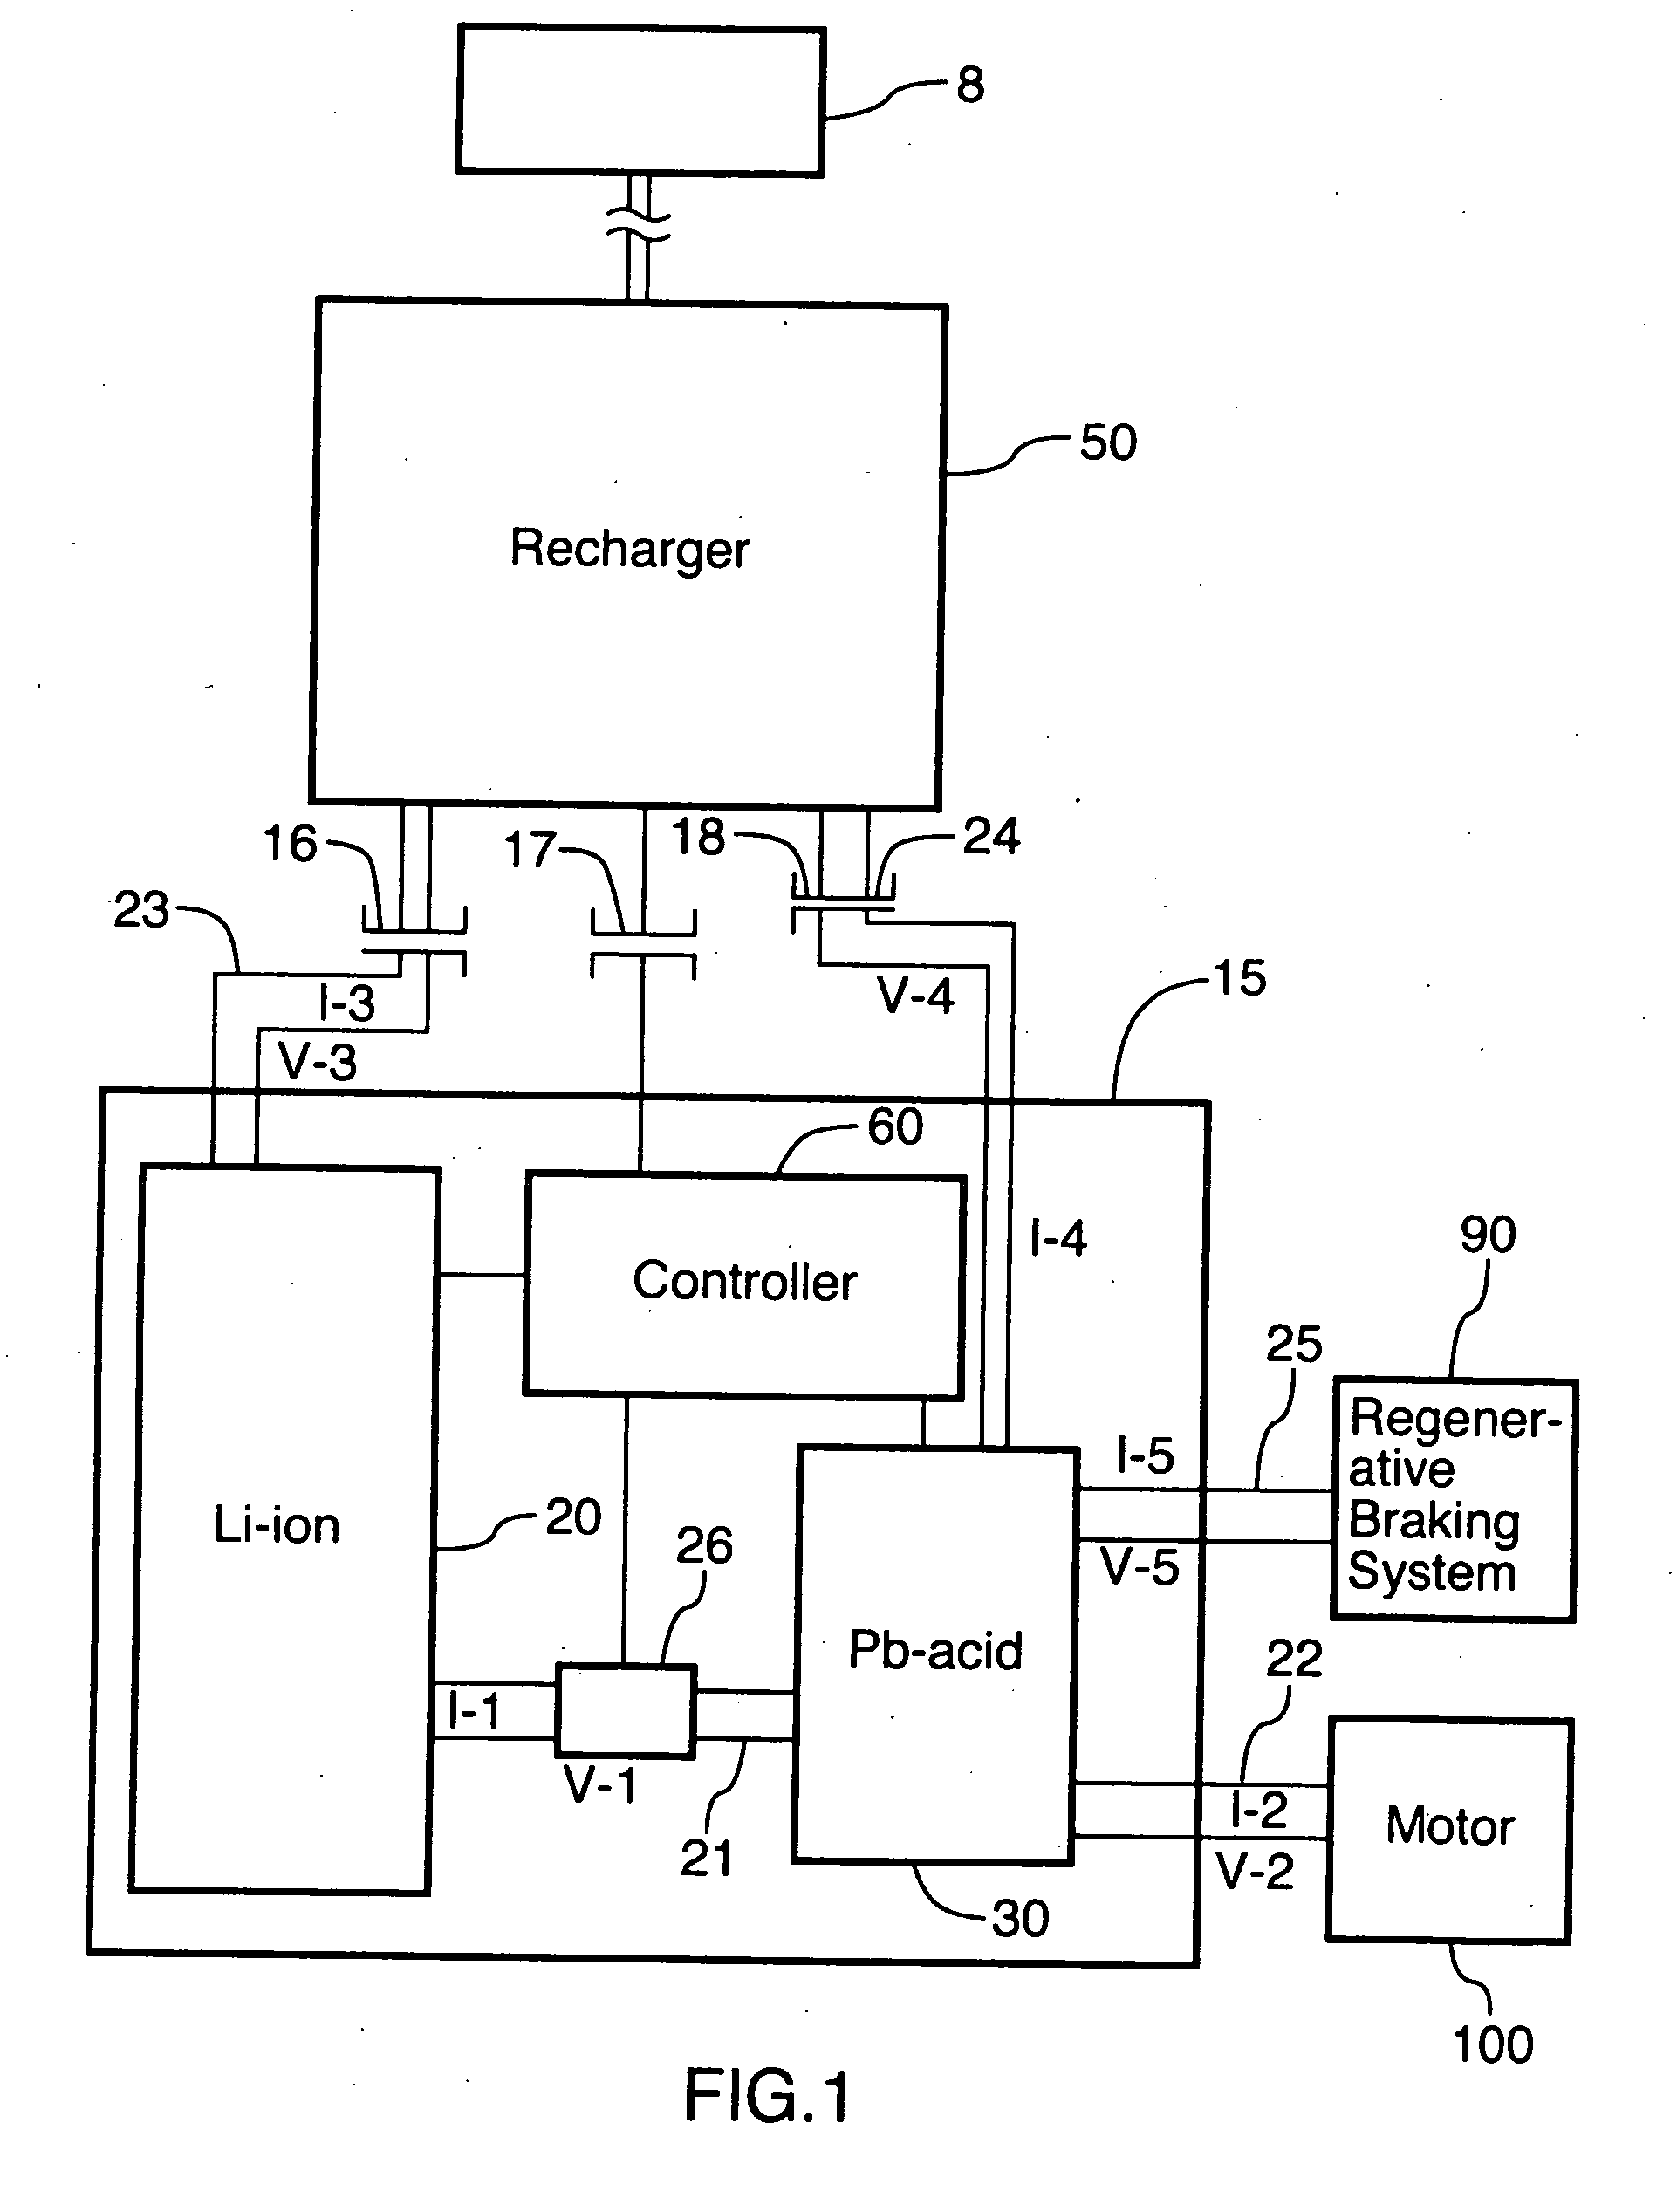 Energy storage device for loads having variabl power rates